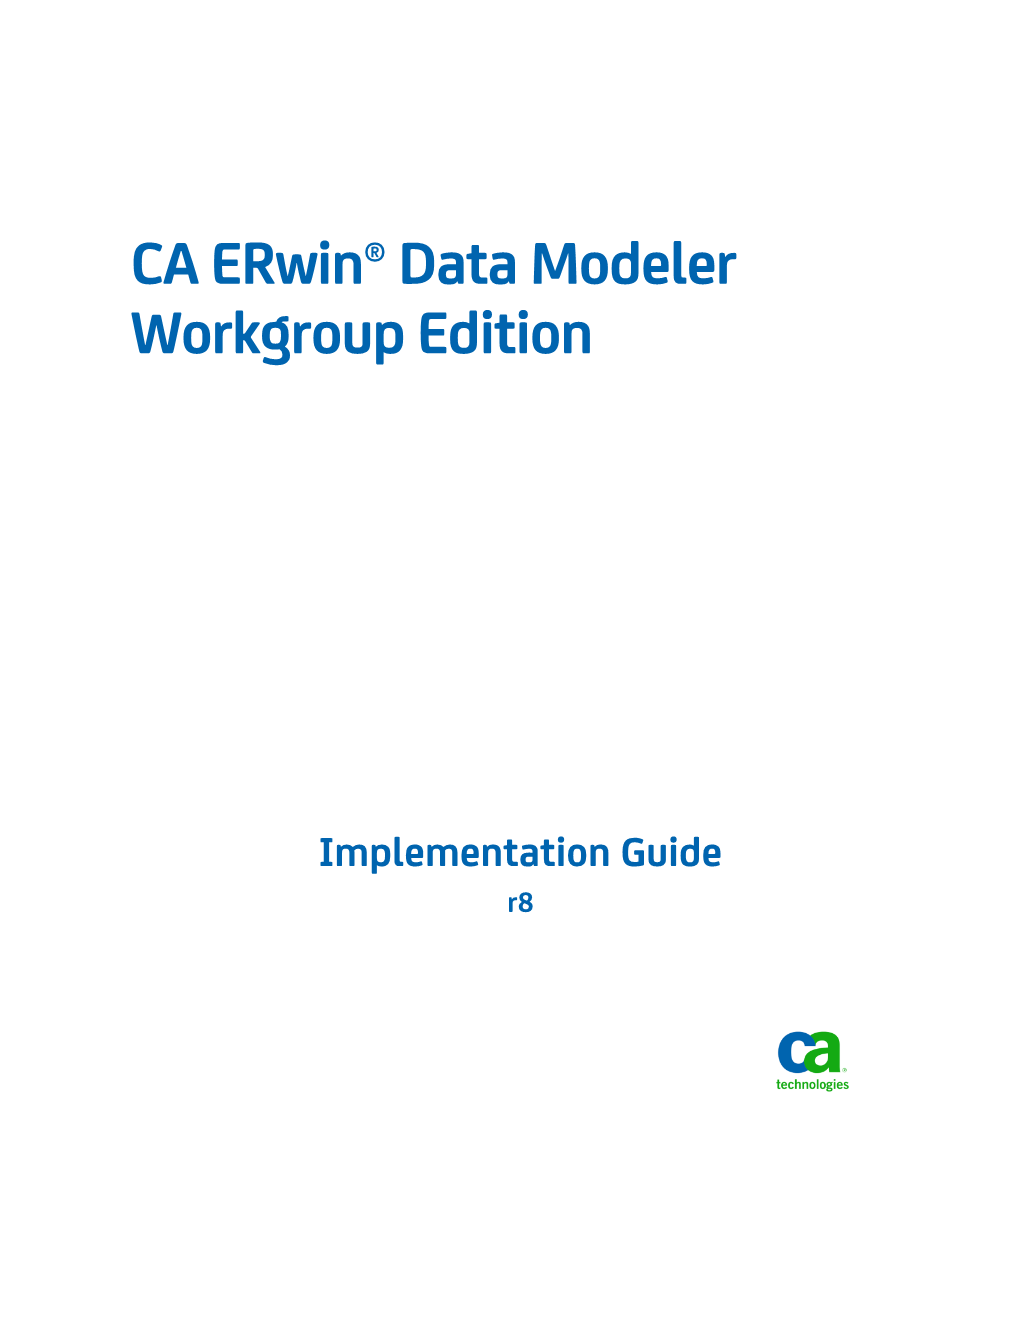 CA Erwin Data Modeler Workgroup Edition Implementation Guide